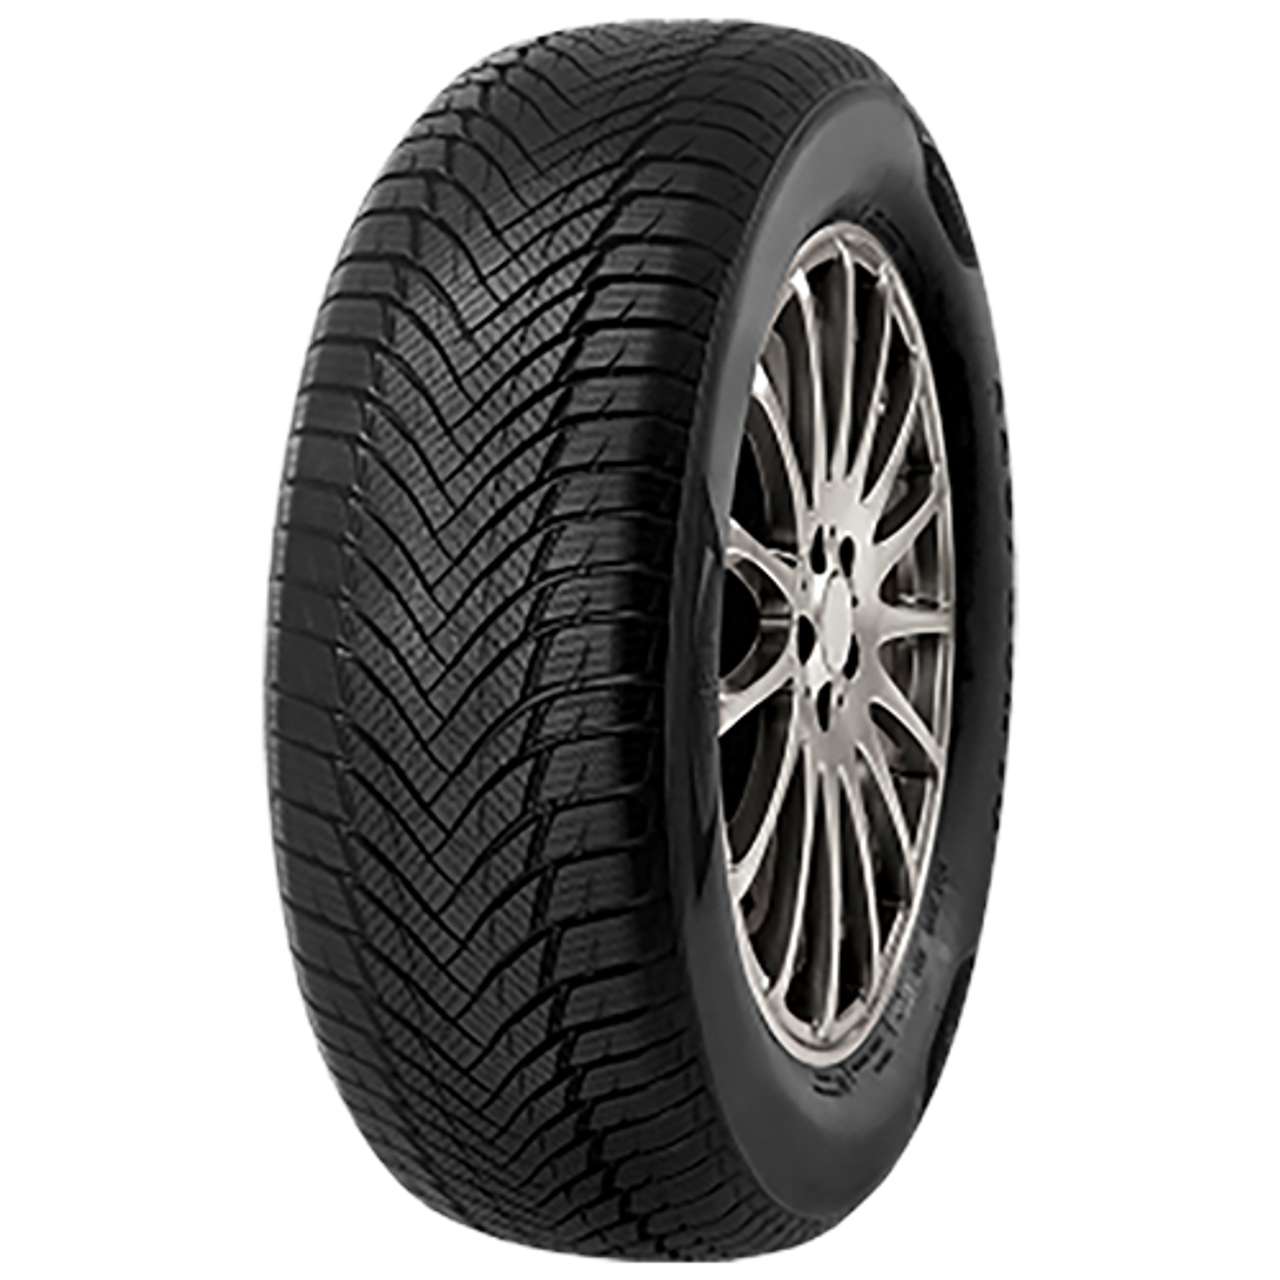 IMPERIAL SNOWDRAGON HP 205/65R16 99H BSW